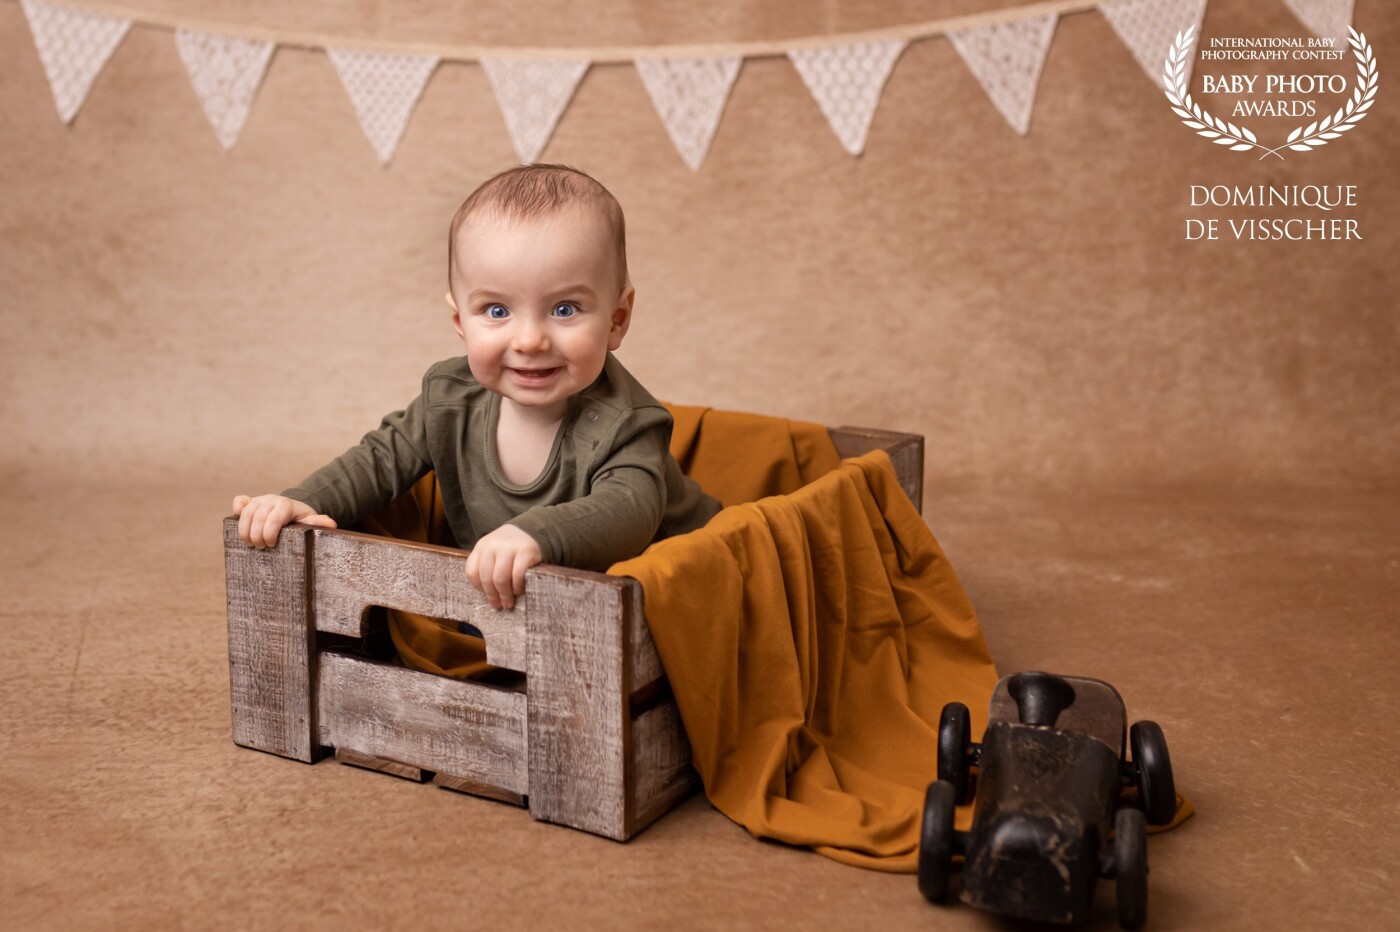 One year ago I was the birth photographer of Louis's parents, it was pure magic! And now it was so wonderful doing his birthday shoot a year later. He's such a nice little boy, he smiled coming into the studio and was still smiling when he left. I bet he's got this from his parents.